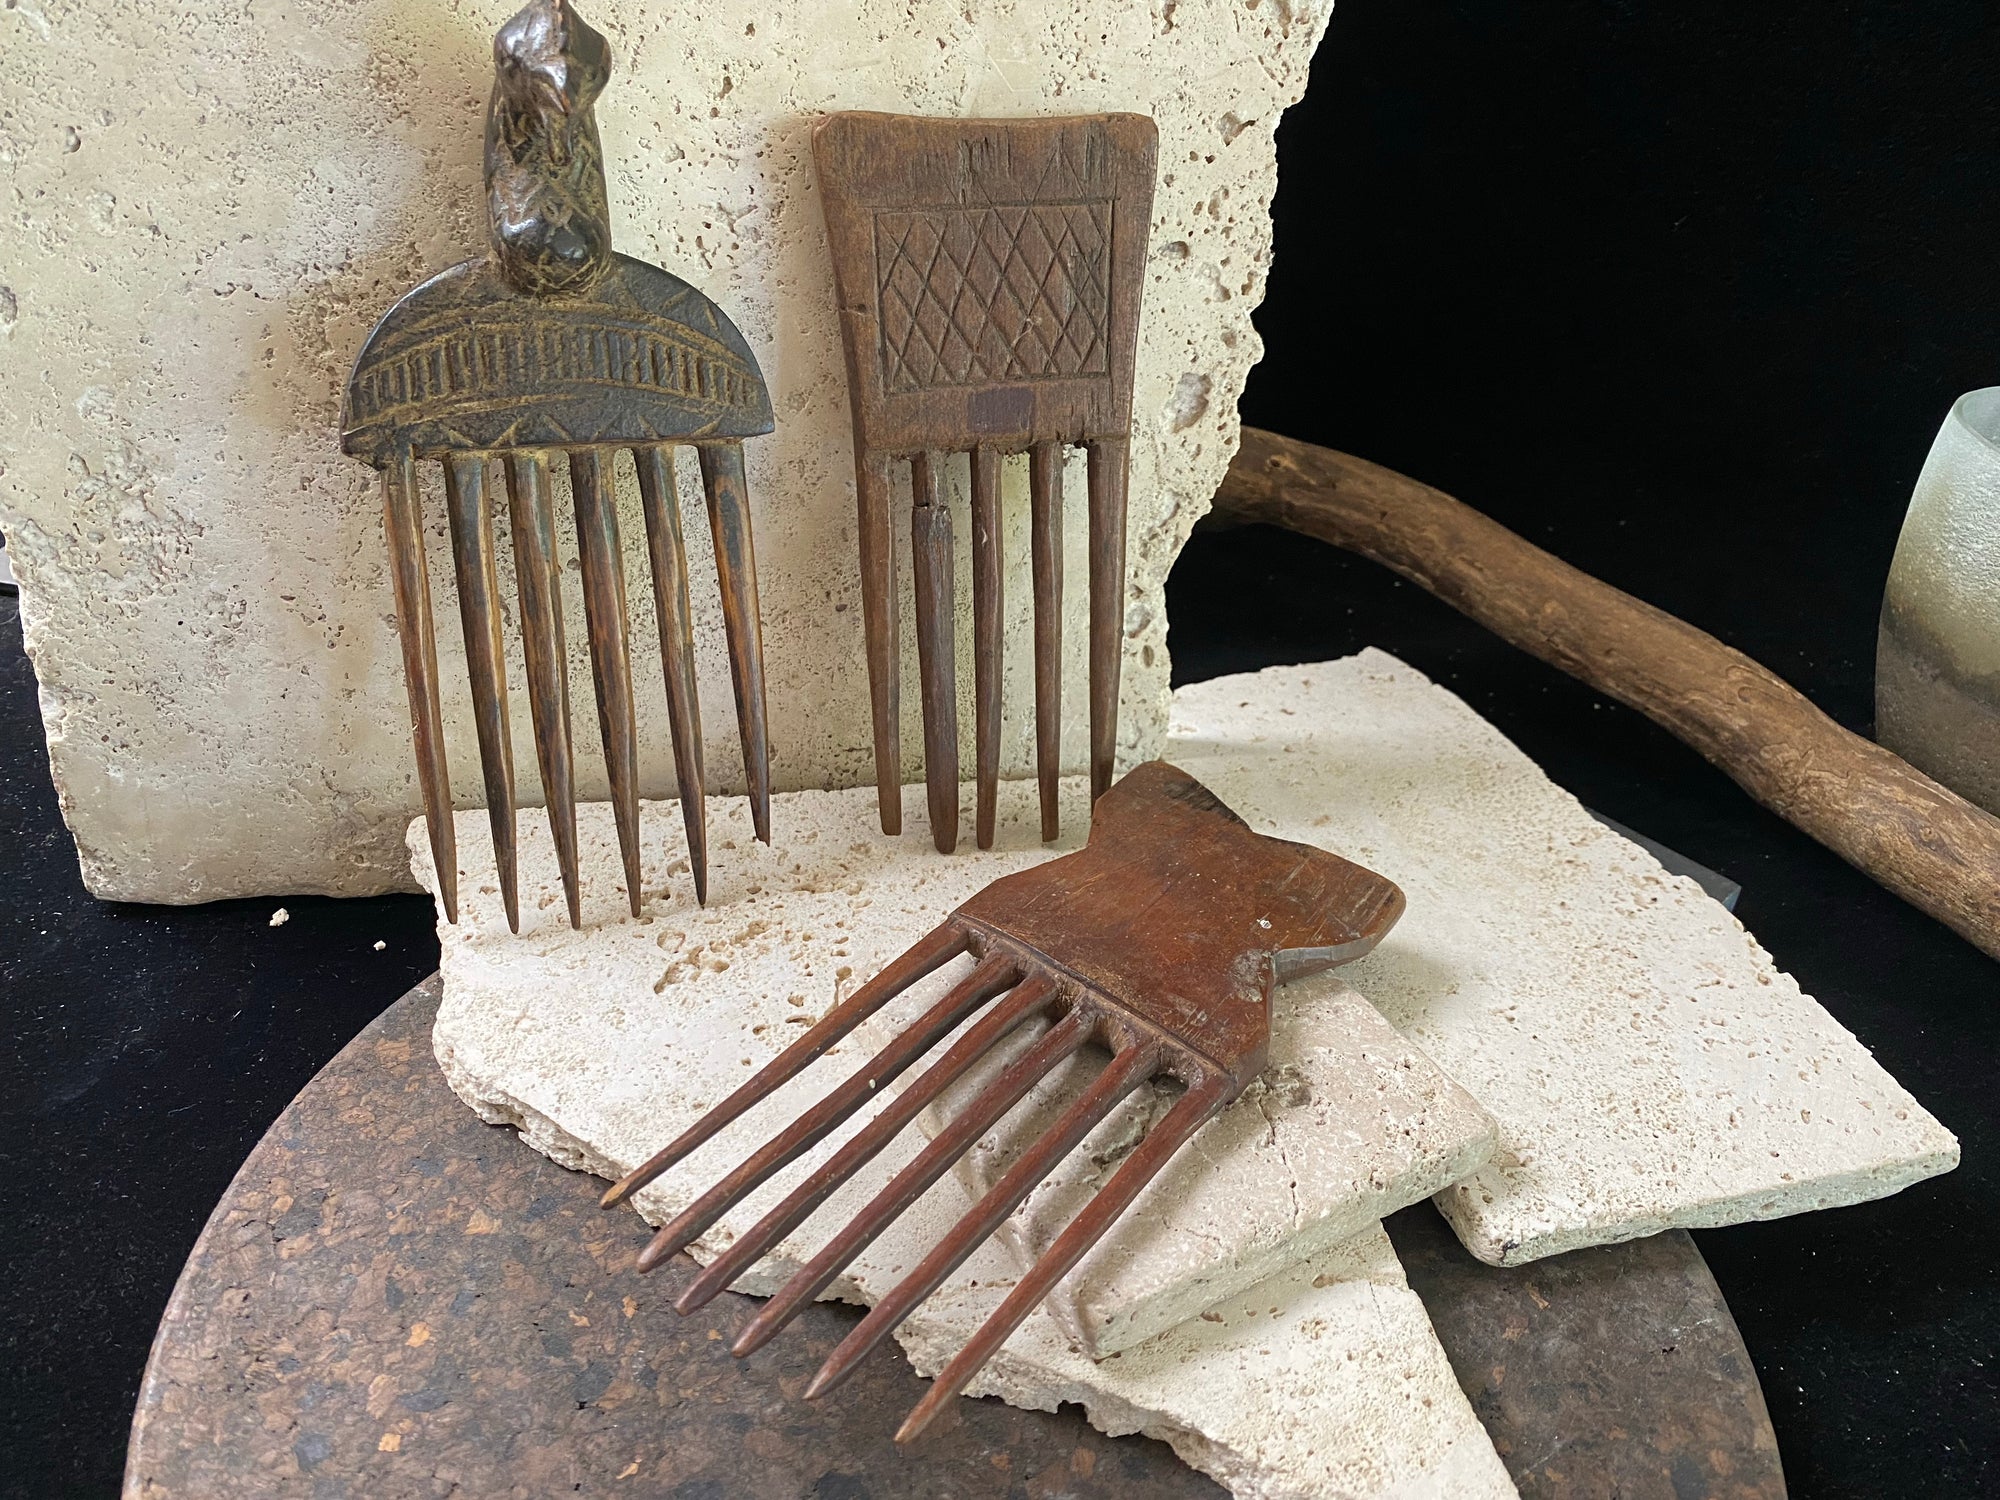 These wood box combs are used to comb the hair and for adornment. Decorative combs may be obtained as gifts or presented to them at marriage. Our combs originate in Ghana and are vintage (pre 1980). All combs have minor wood damage, irregularities and marks. Approximately 18 cm length (6.75")